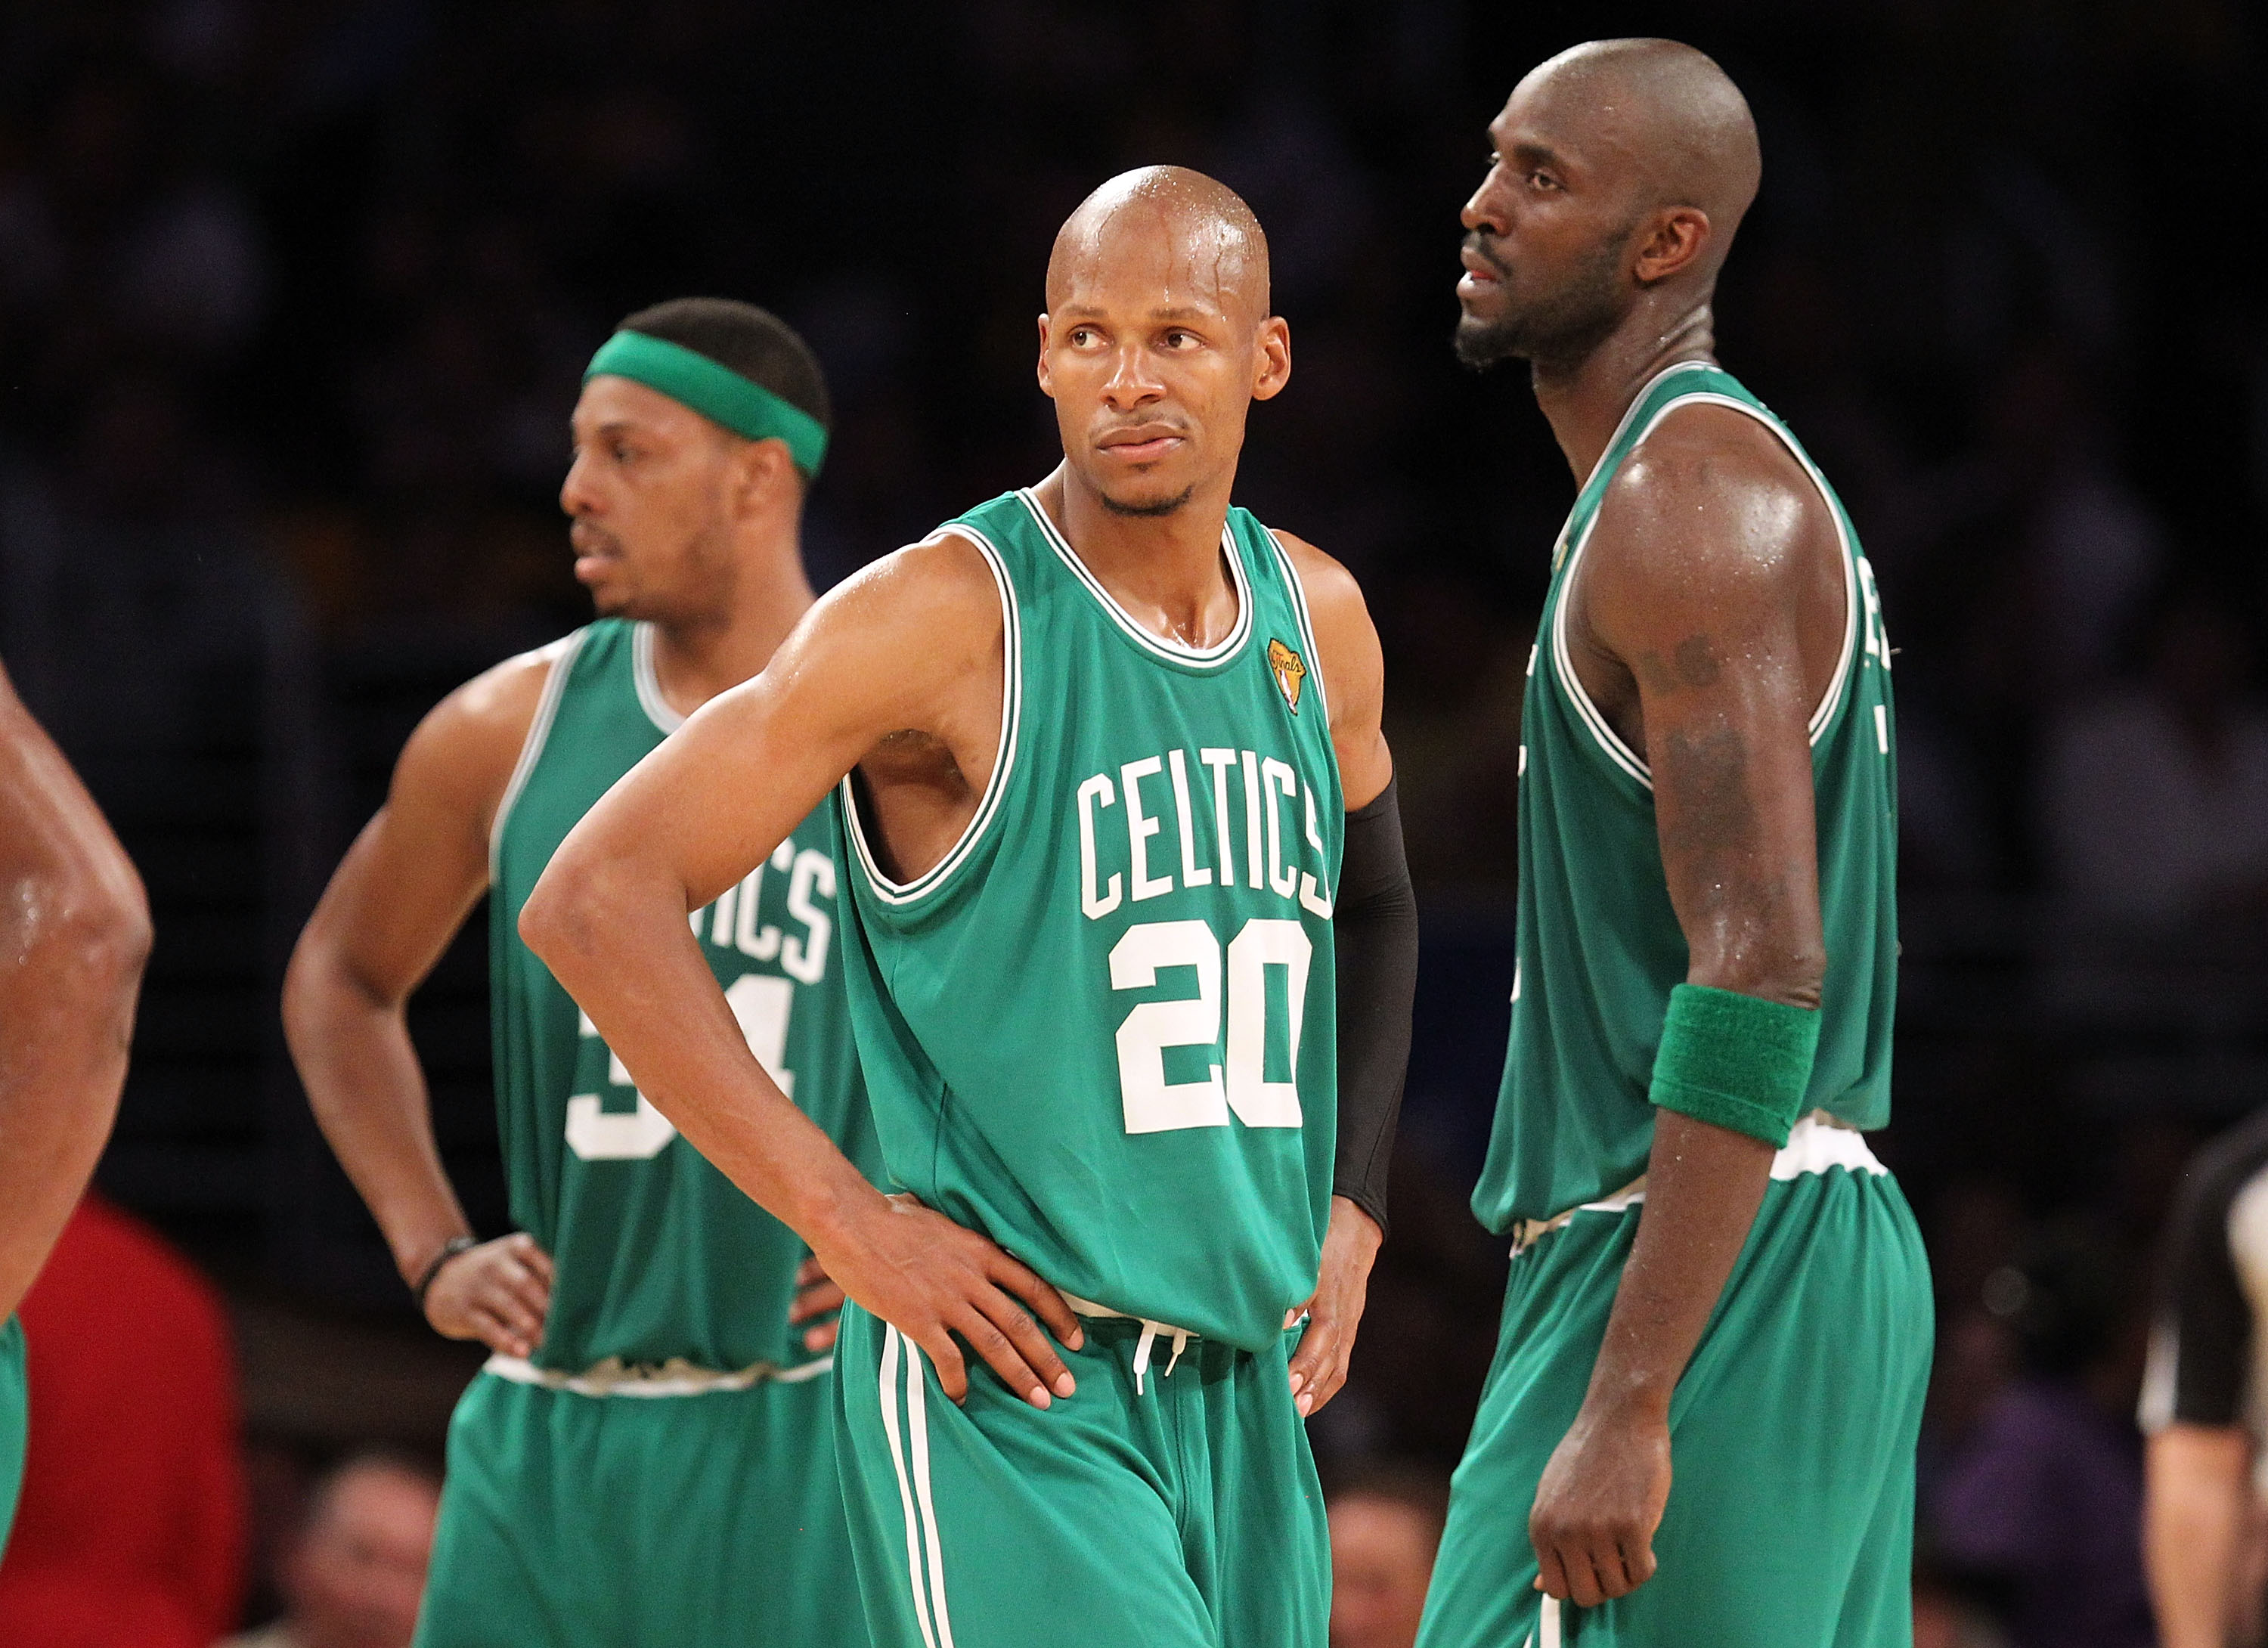 LOS ANGELES, CA - JUNE 15:  (L-R) Paul Pierce #34, Ray Allen #20 and Kevin Garnett #5 of the Boston Celtics look on in the second half while taking on the Los Angeles Lakers in Game Six of the 2010 NBA Finals at Staples Center on June 15, 2010 in Los Ange